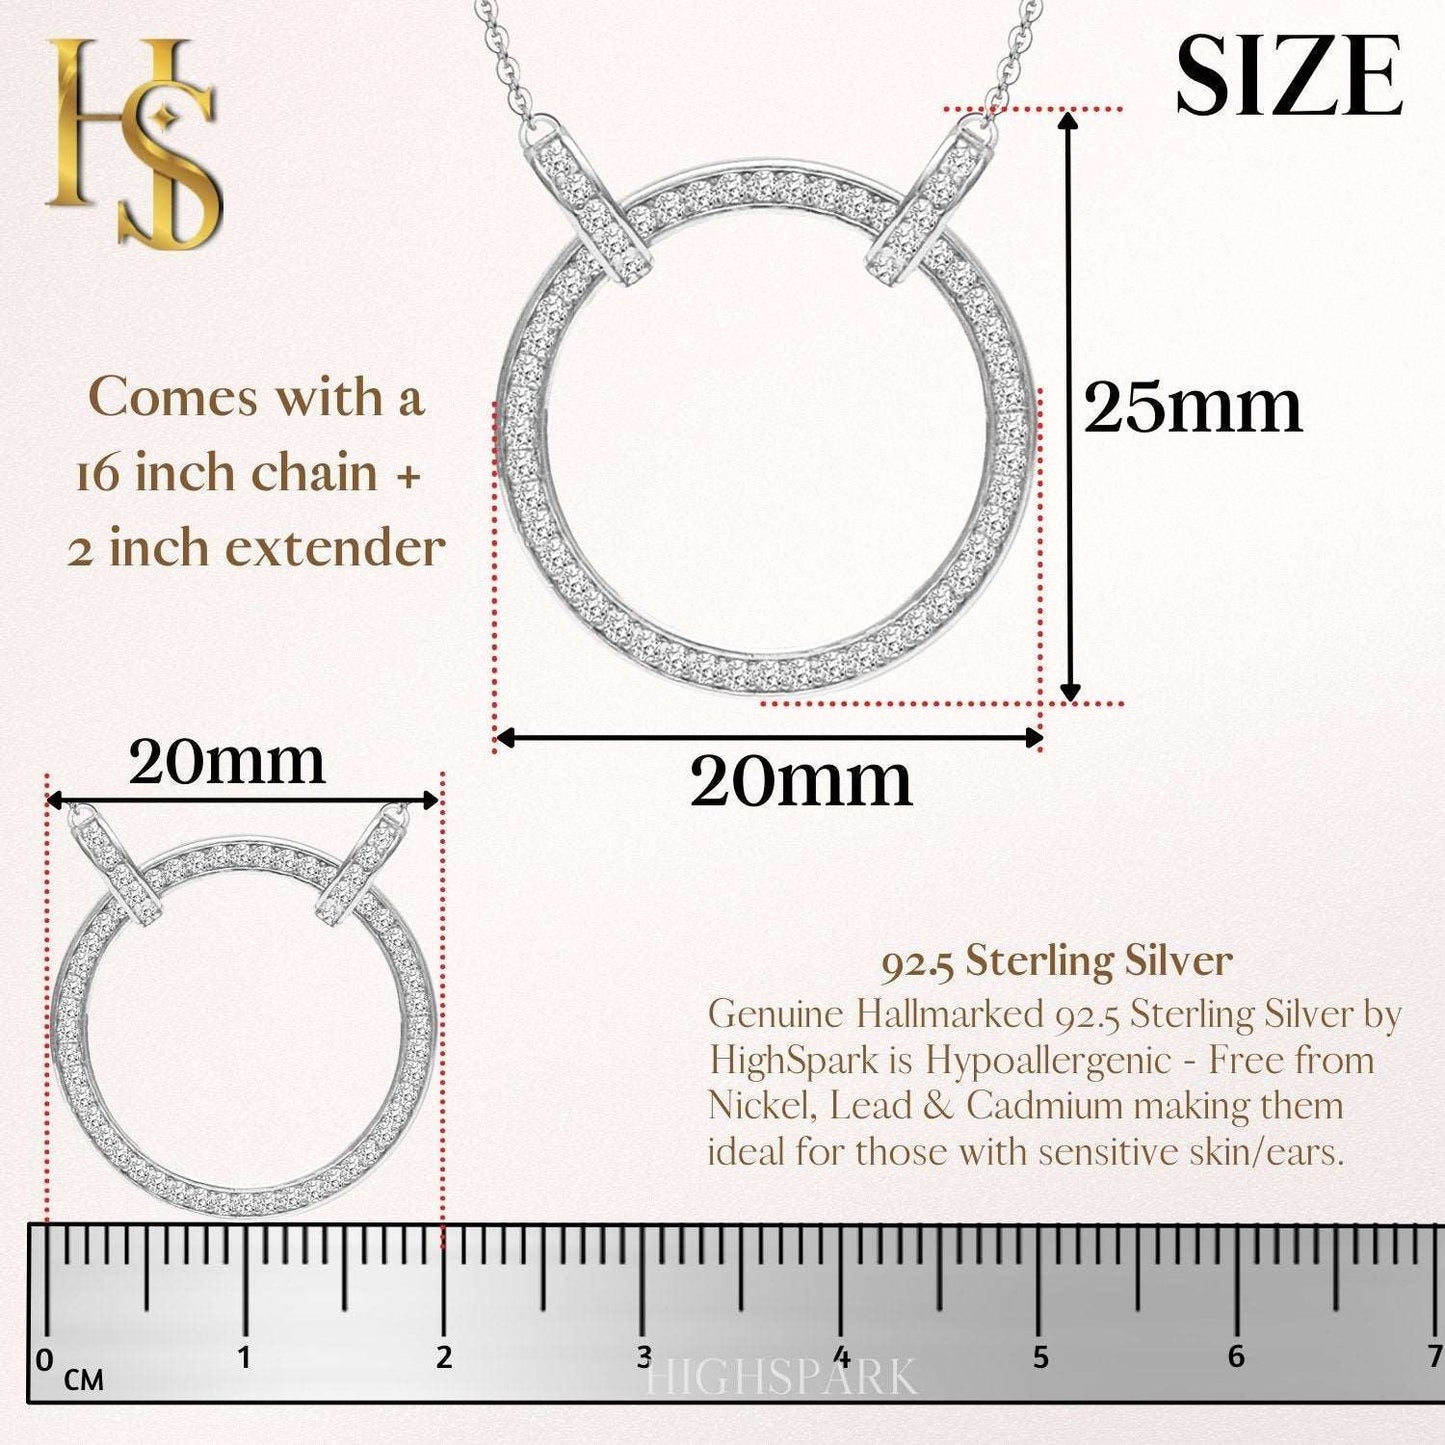 Circle of Life Celebrity Necklace in 92.5 Silver - Studded with Swiss Zirconia Unity, Wholeness and Completeness